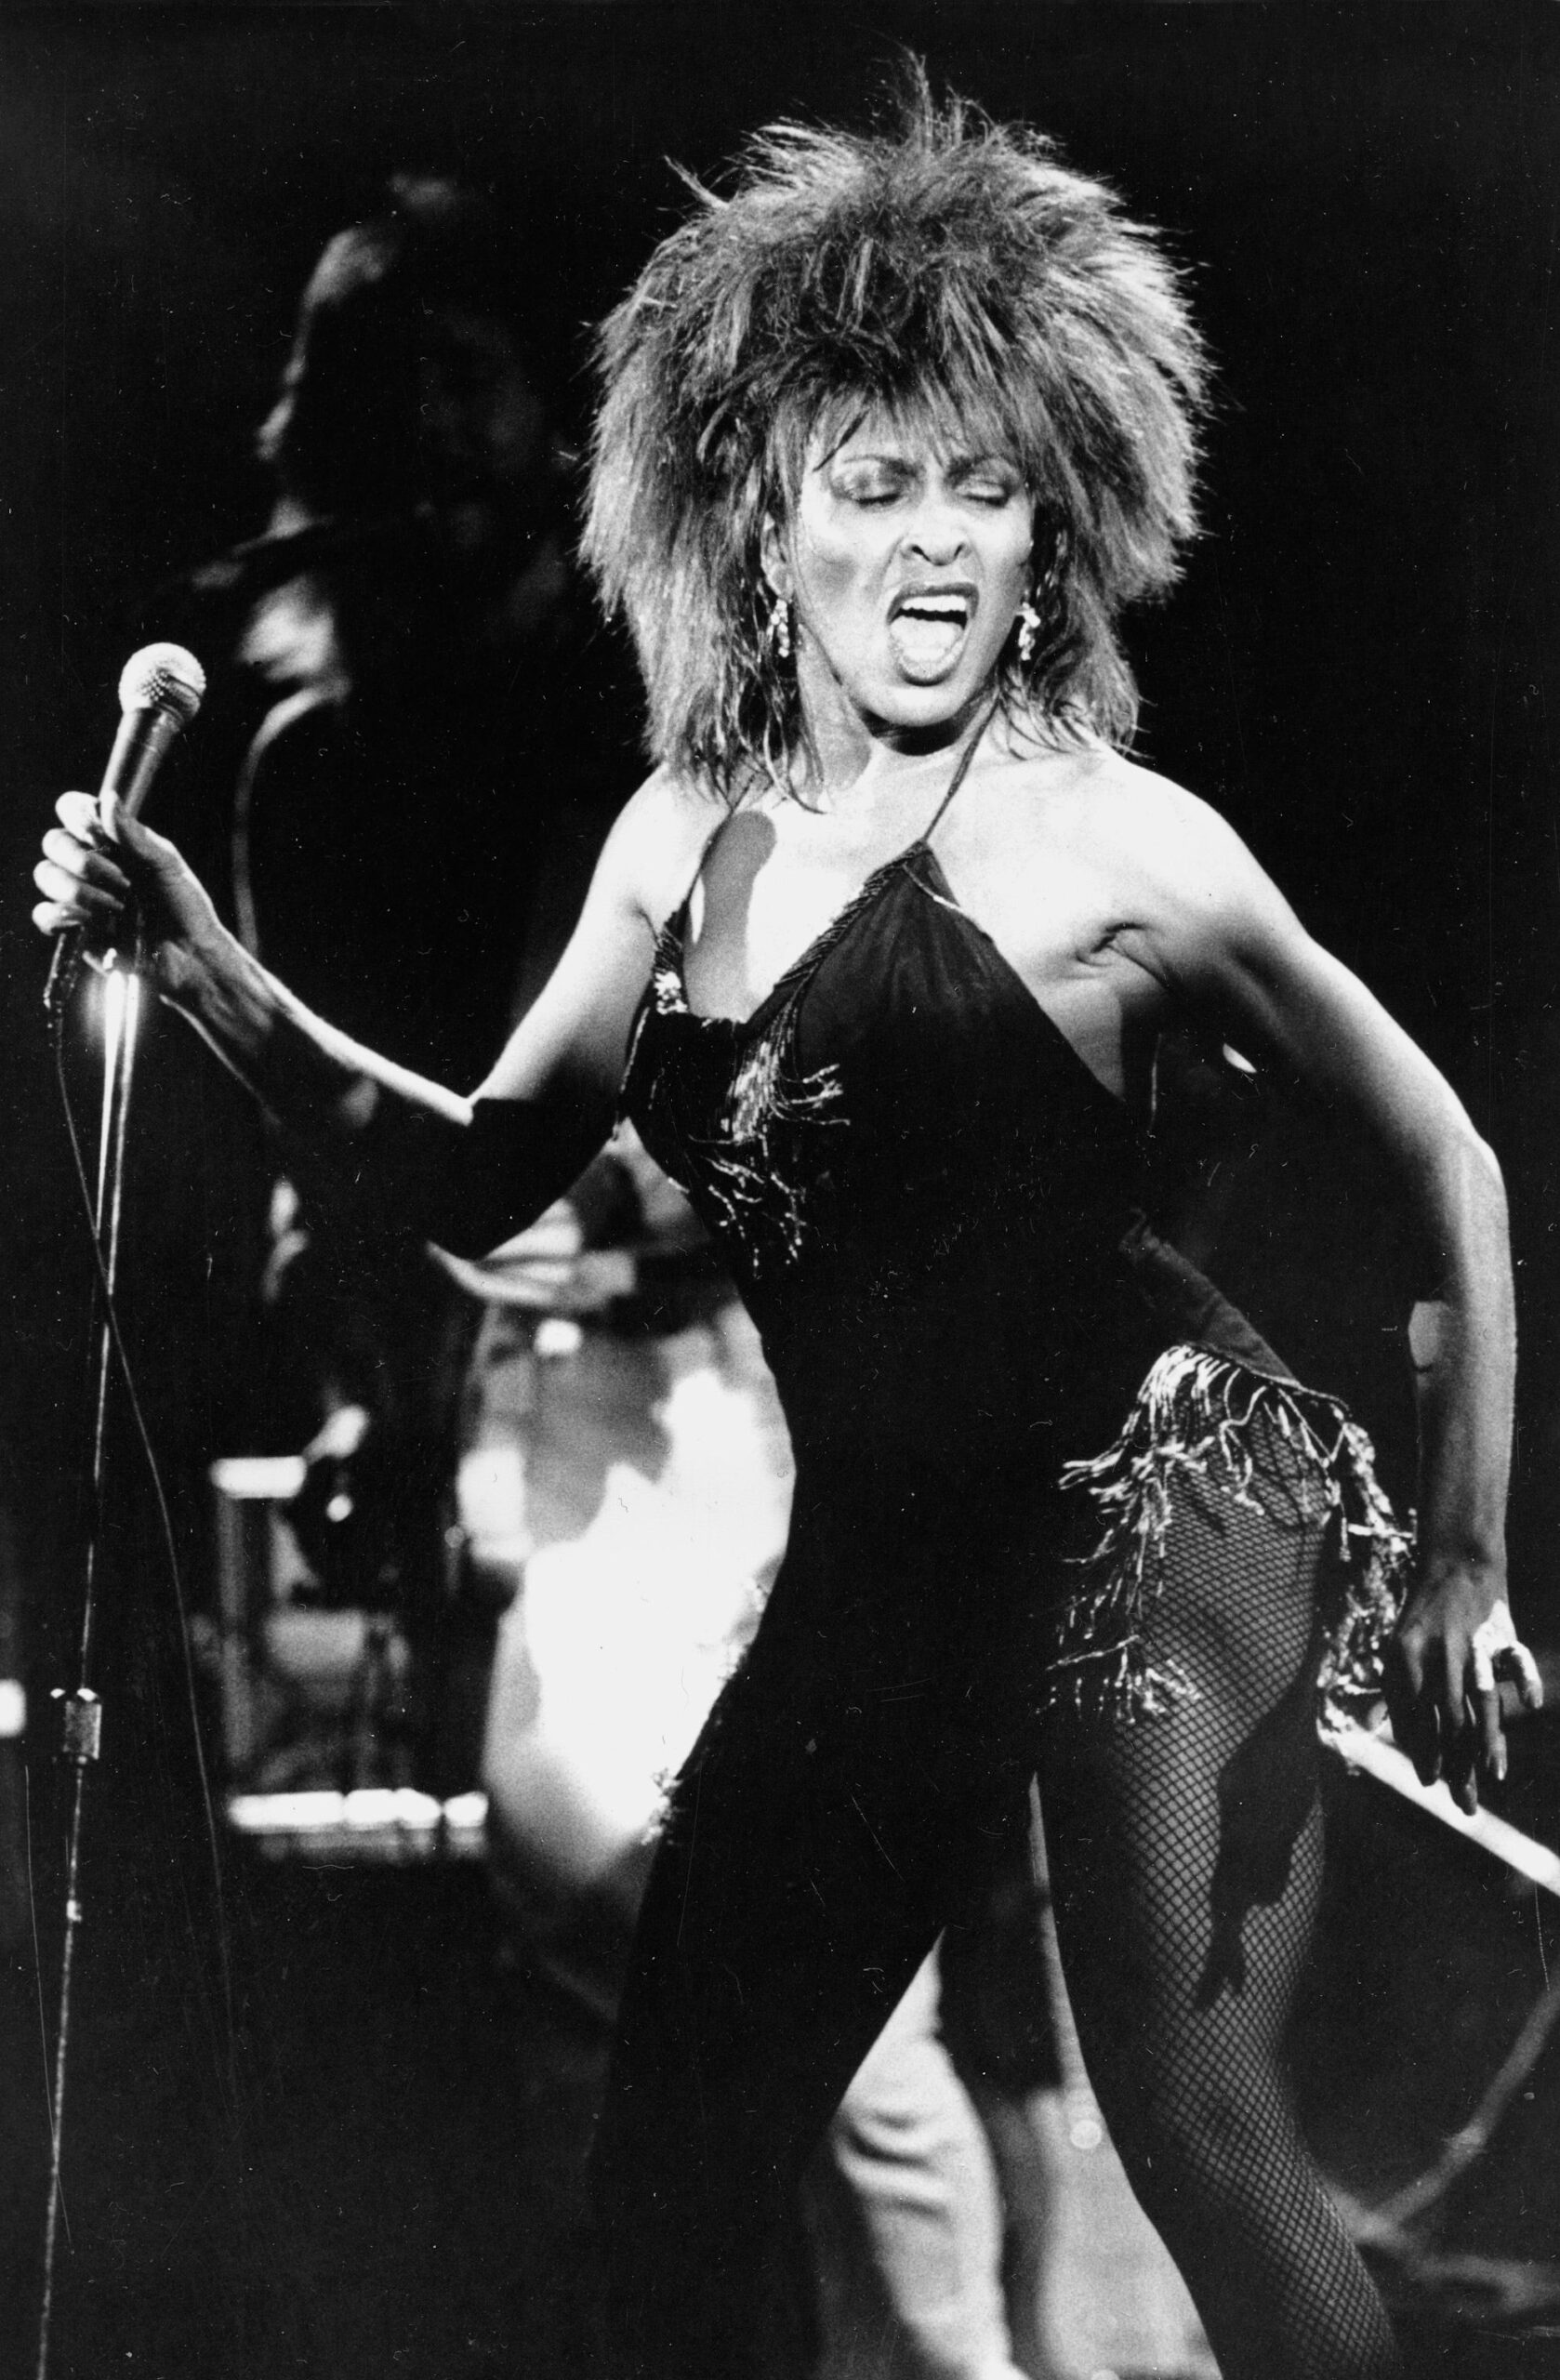 Tina Turner performing in Los Angeles on September 2, 1984.